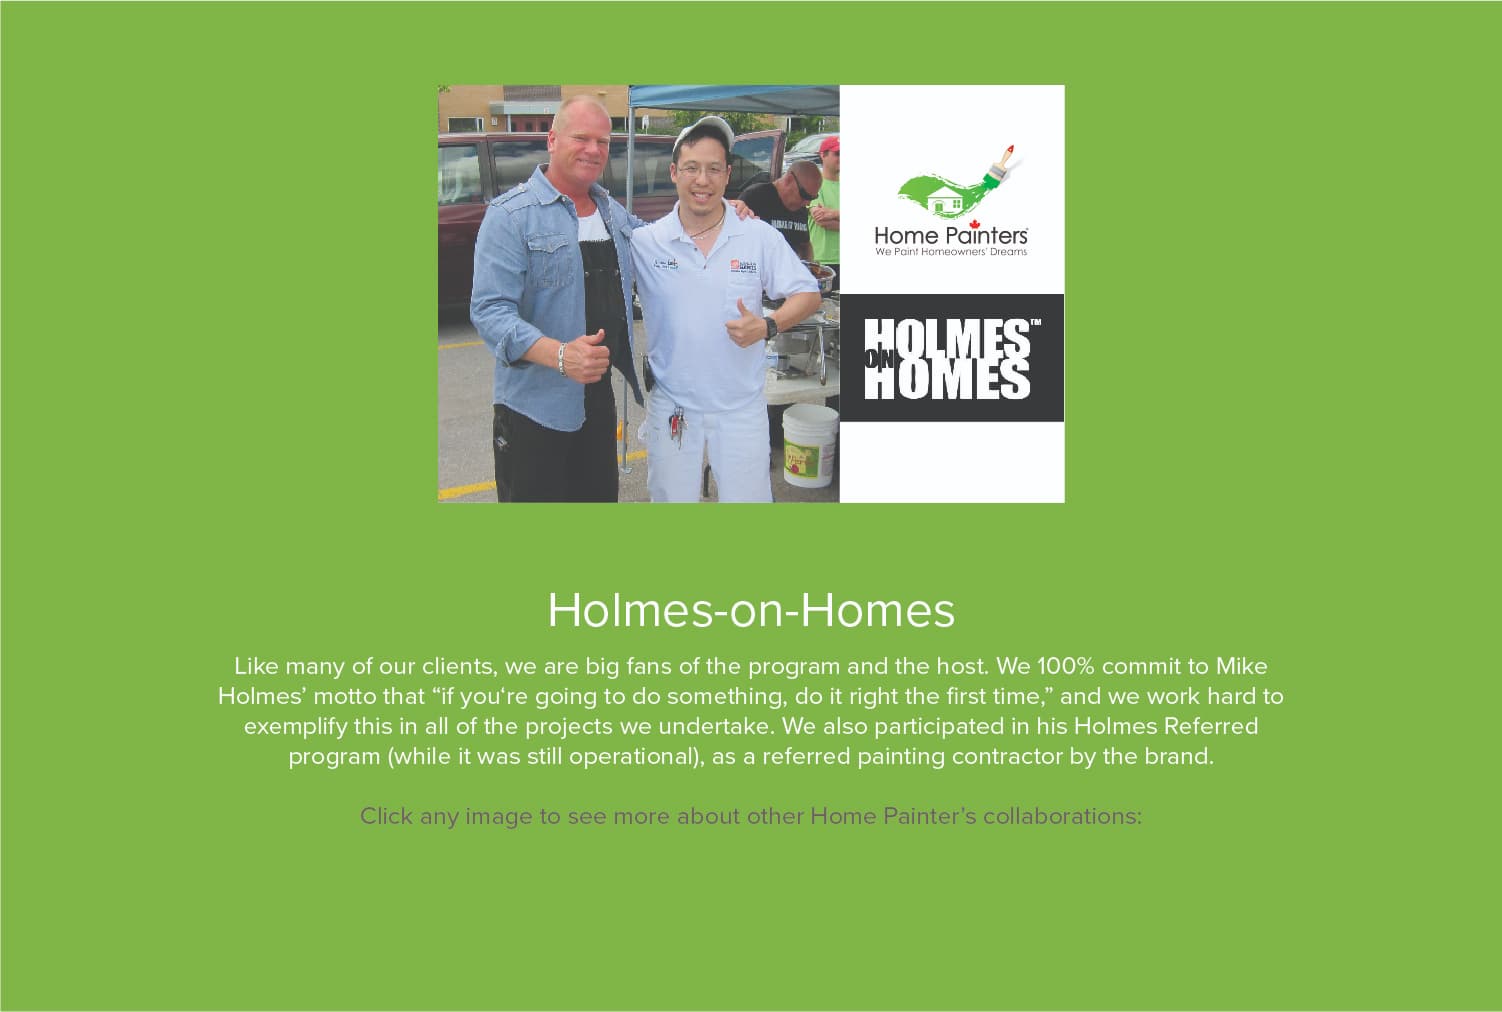 Home painter's collaboration with Holmes on Homes